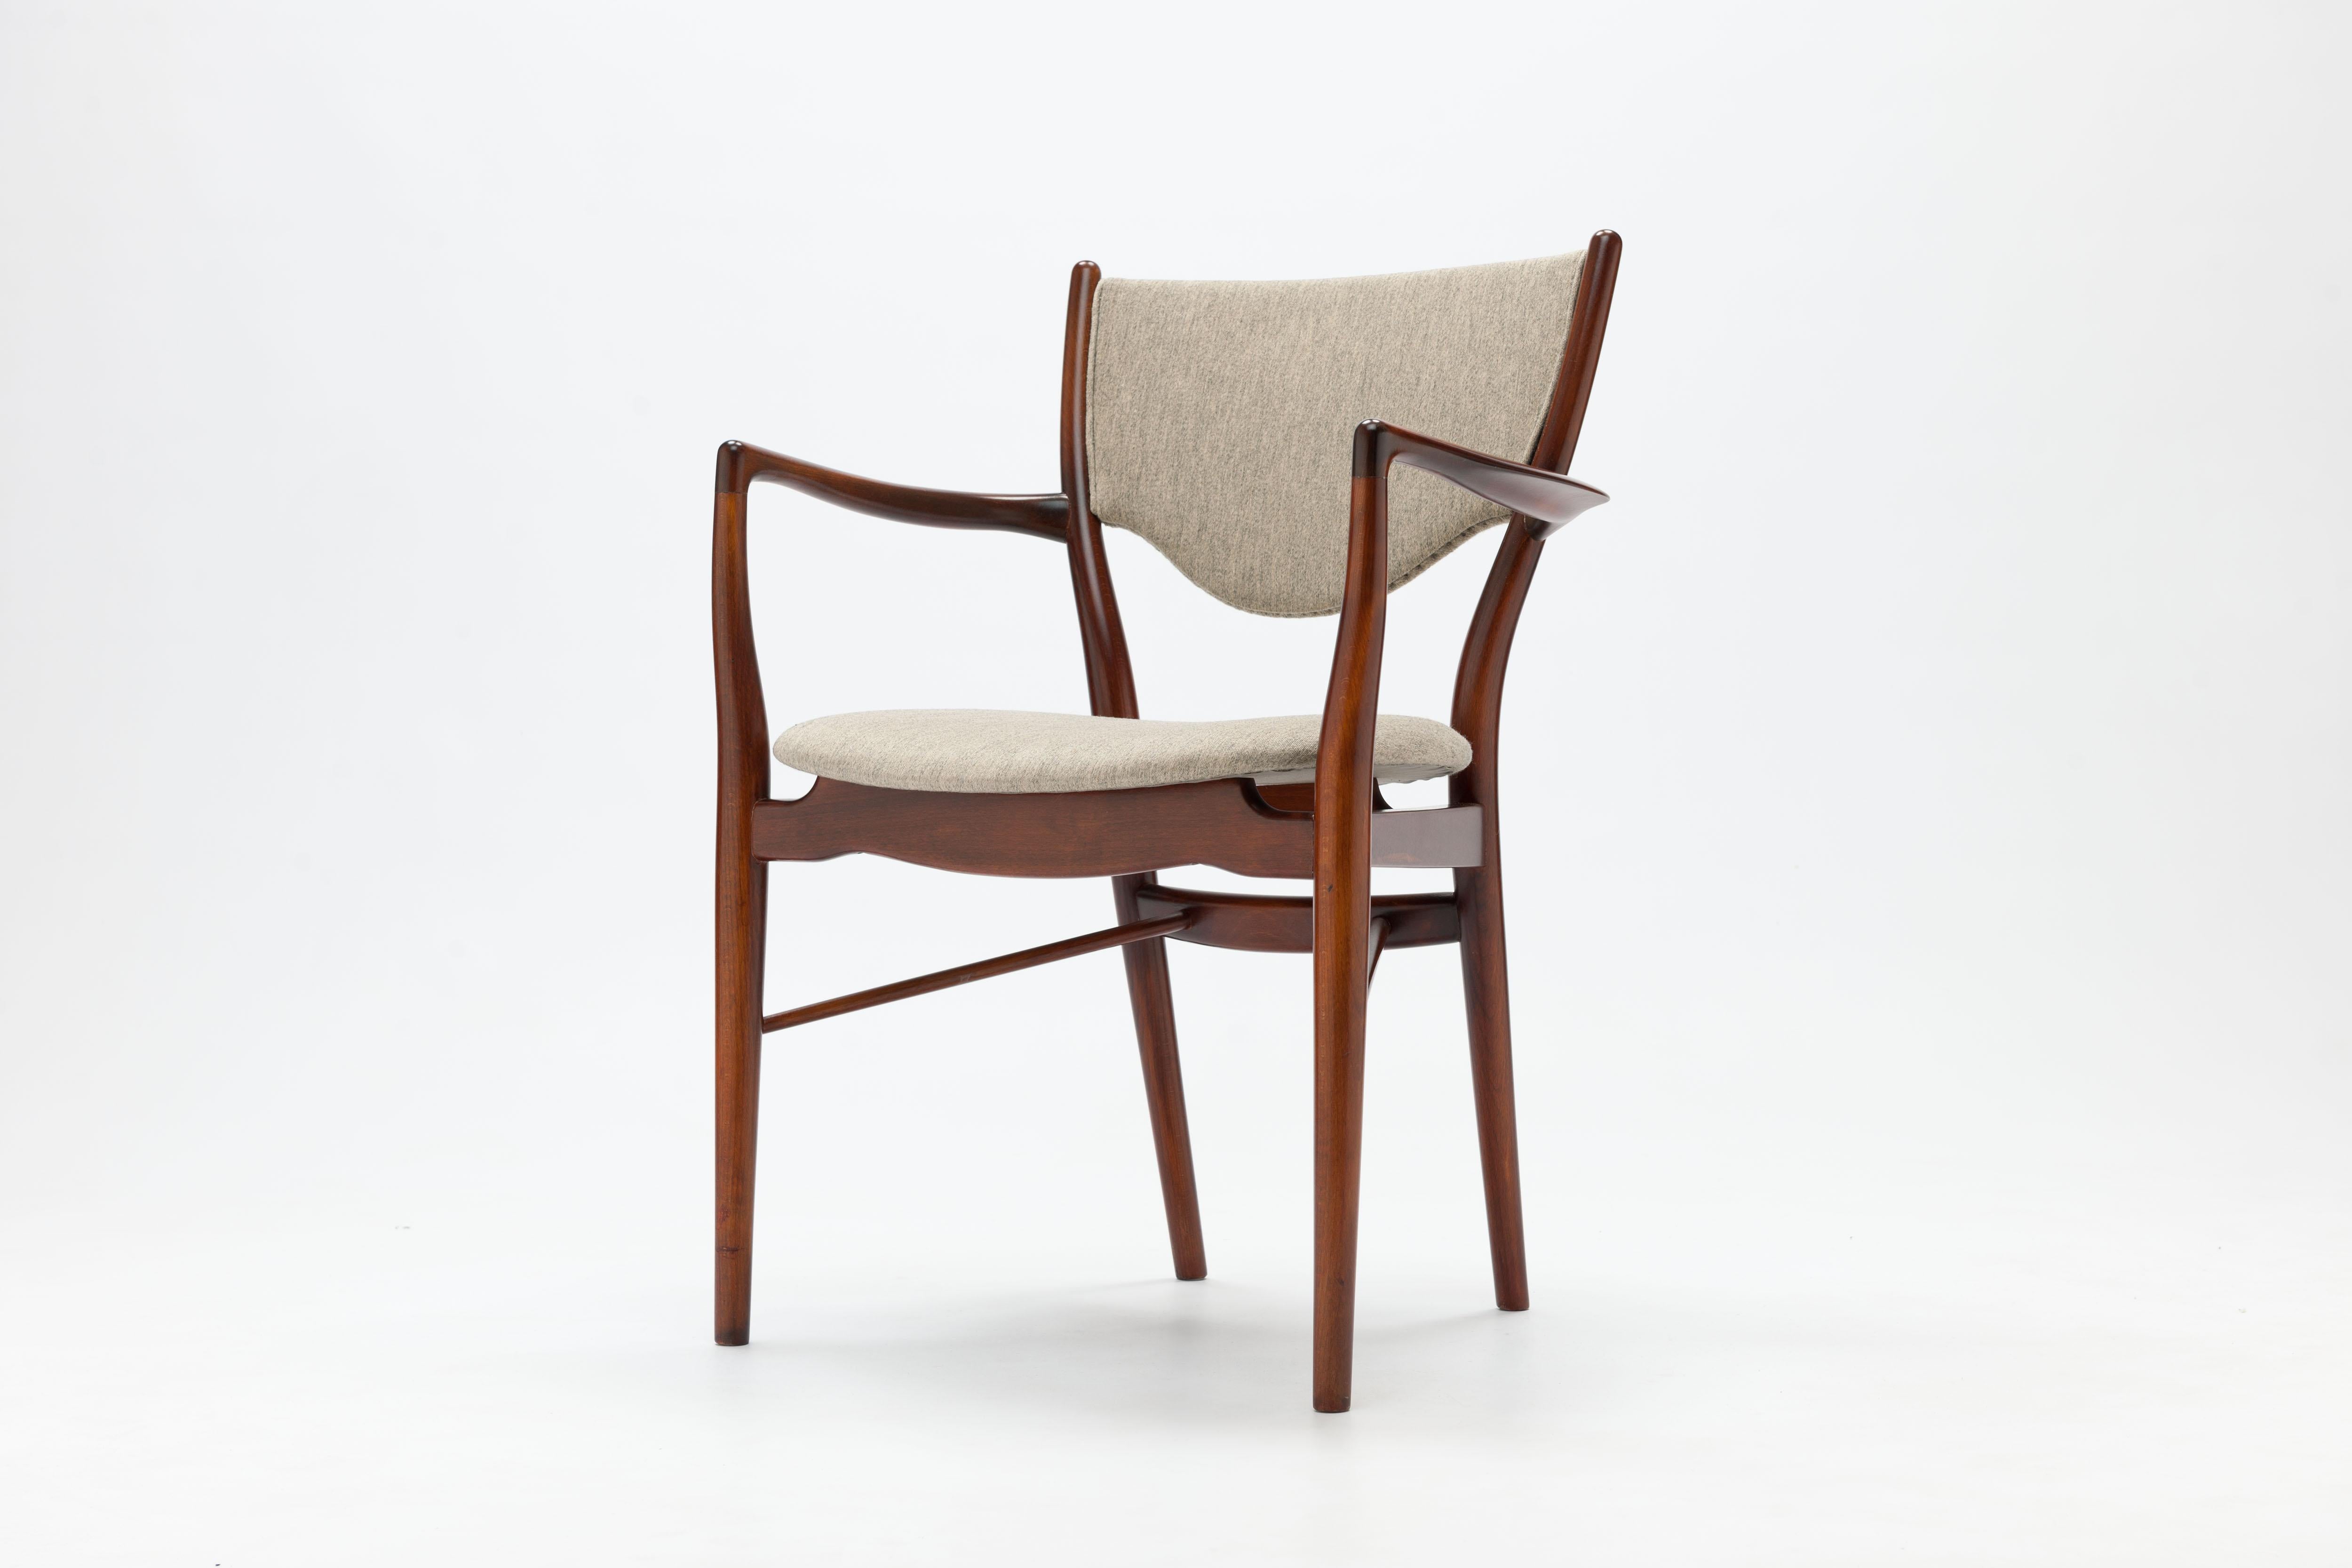 Armchair model BO-46 by Finn Juhl for Bovirke Denmark. Designed in 1953 Based Upon his earlier designed chair model NV46 by Niels Vodder.
Frame of stained beech with good conditioned original 'Savak' fabric. Savak is a typical renown Danish quality